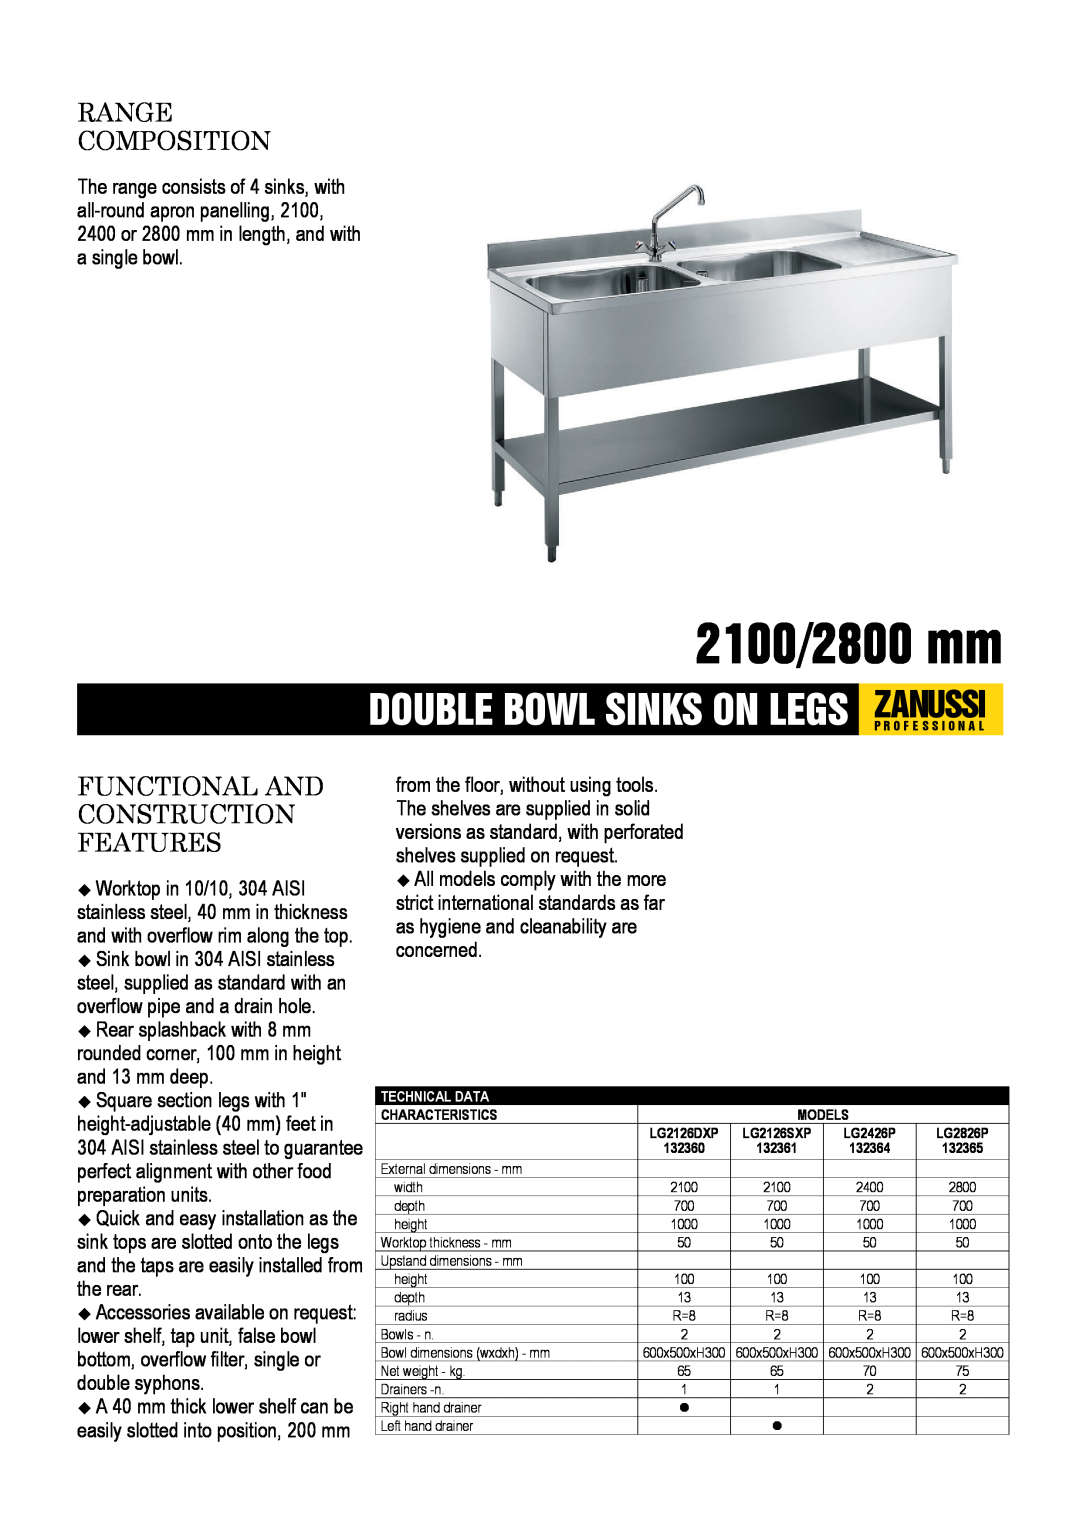 Zanussi 132365, LG2826P, 132361, LG2426P dimensions 2100/2800 mm, Range Composition, Functional And Construction Features 